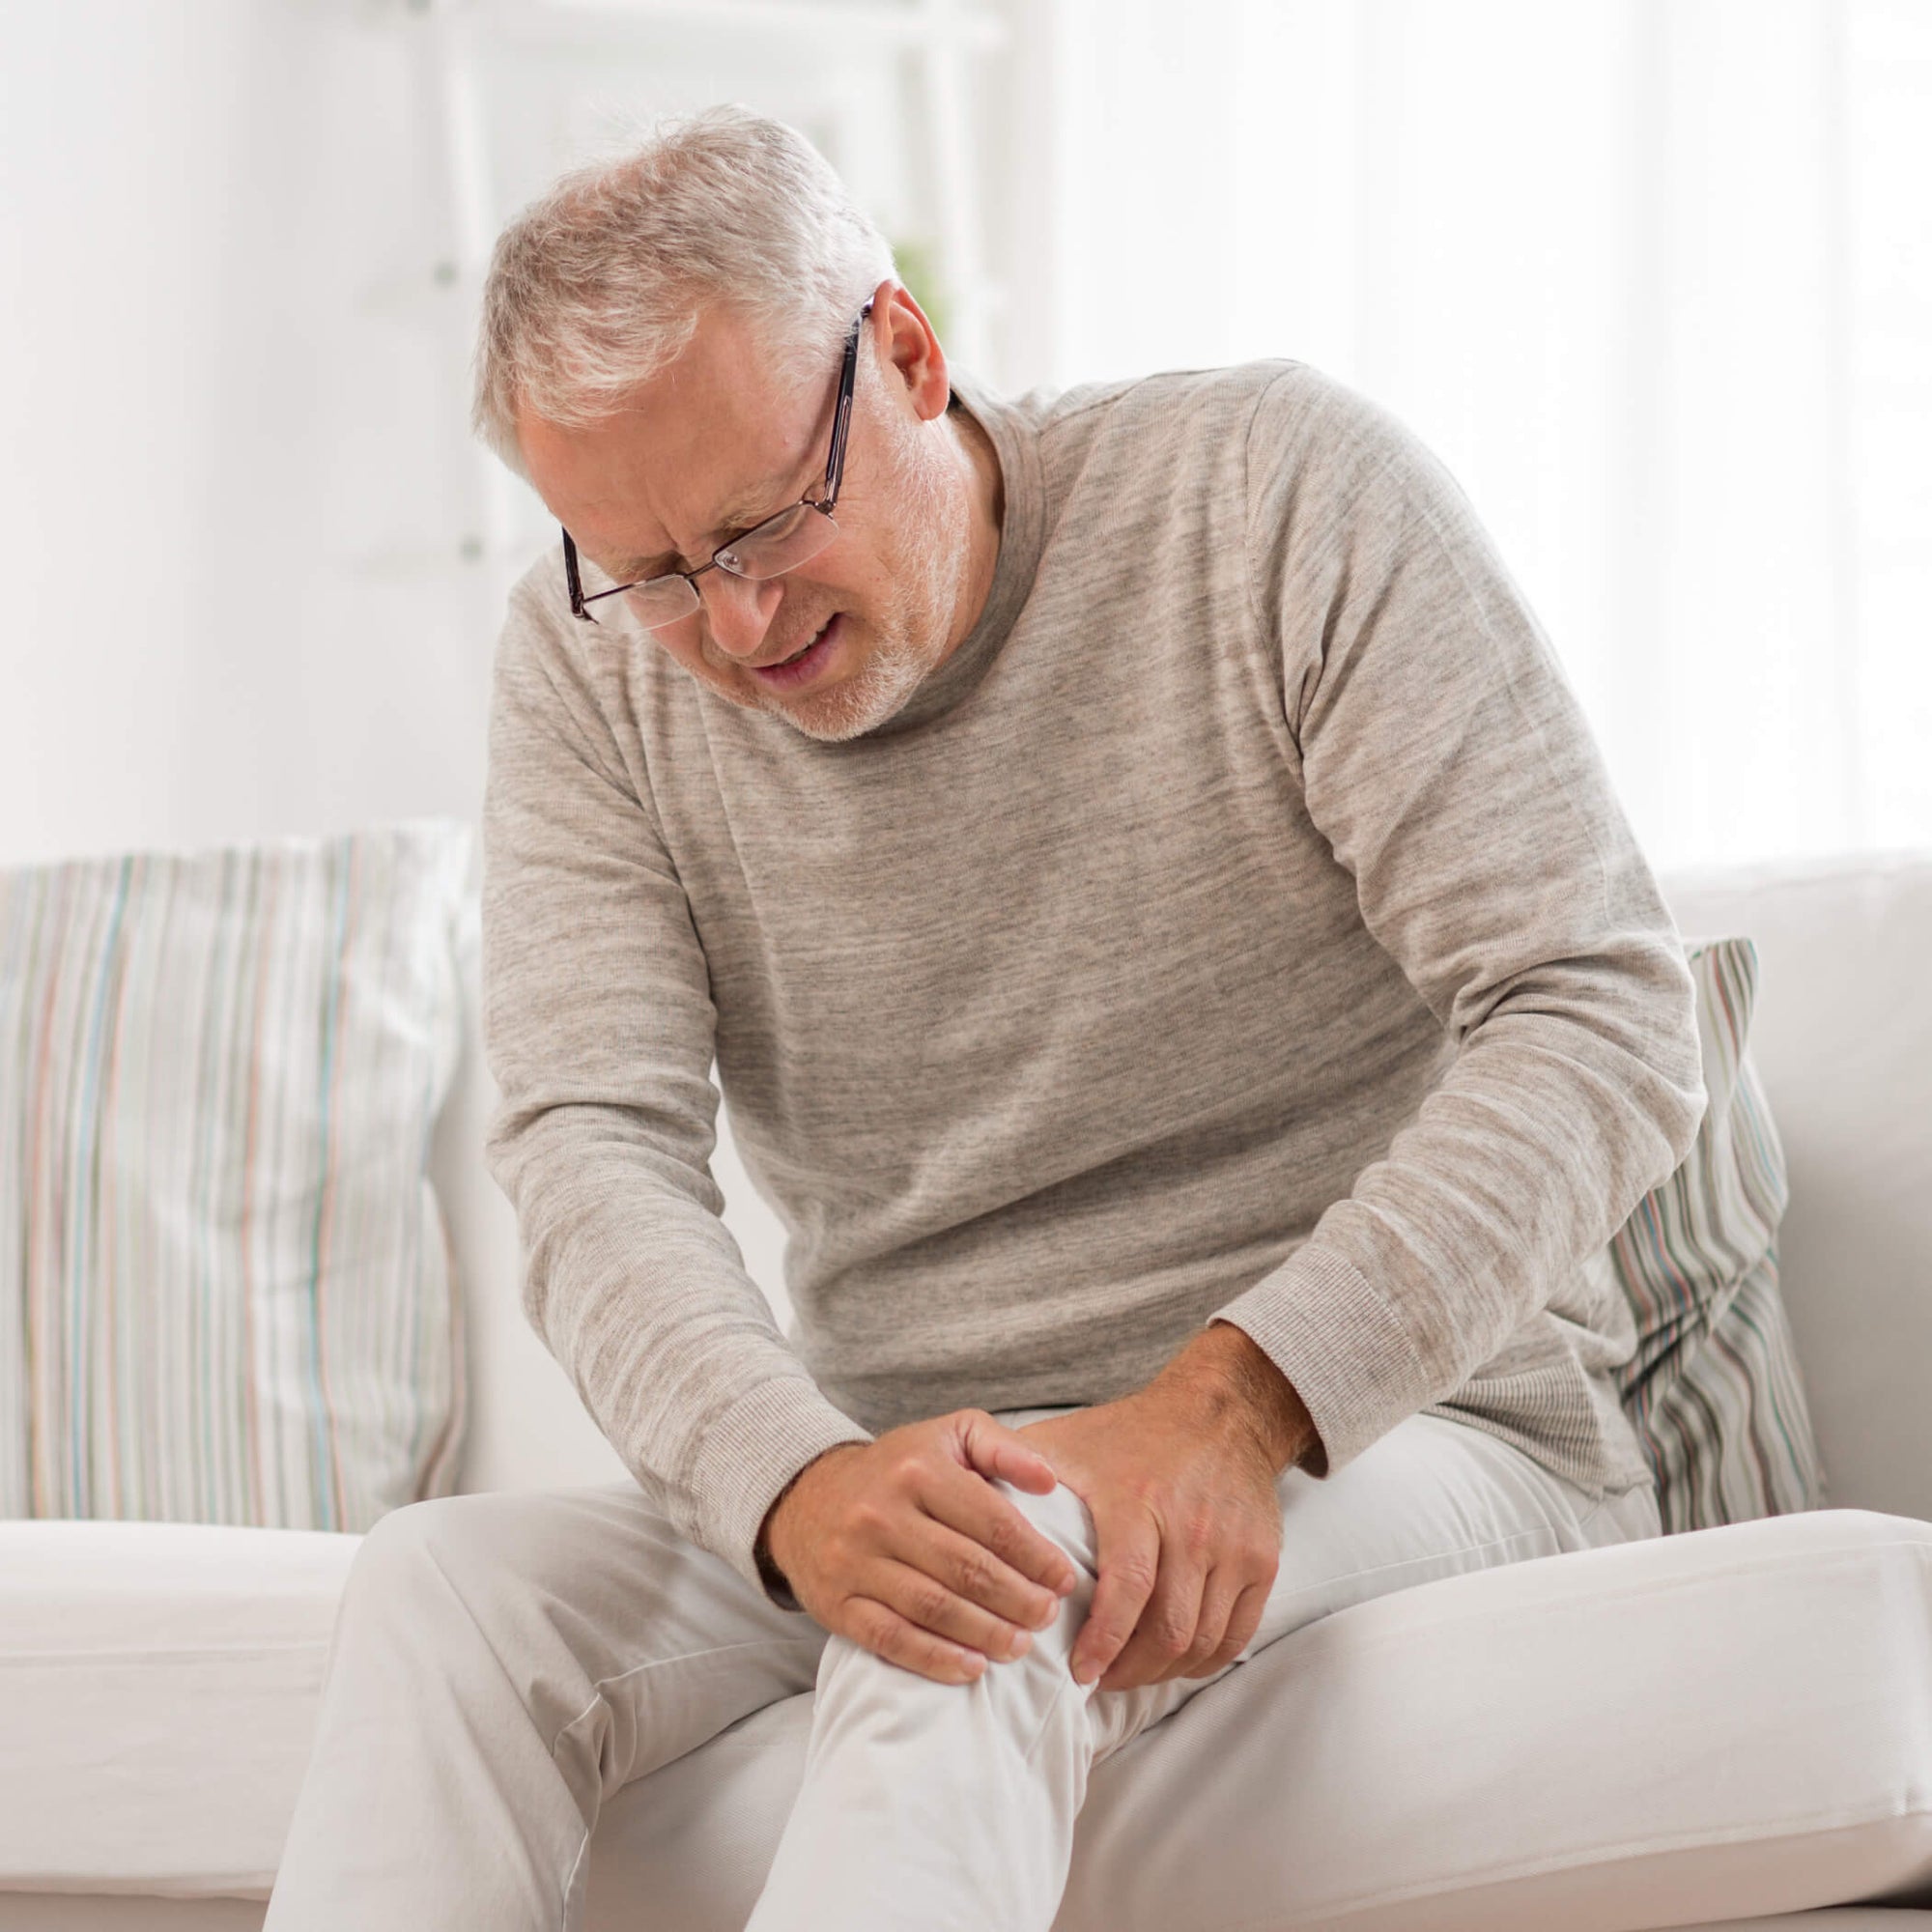 6 Signs That Your Joint Health is Deteriorating